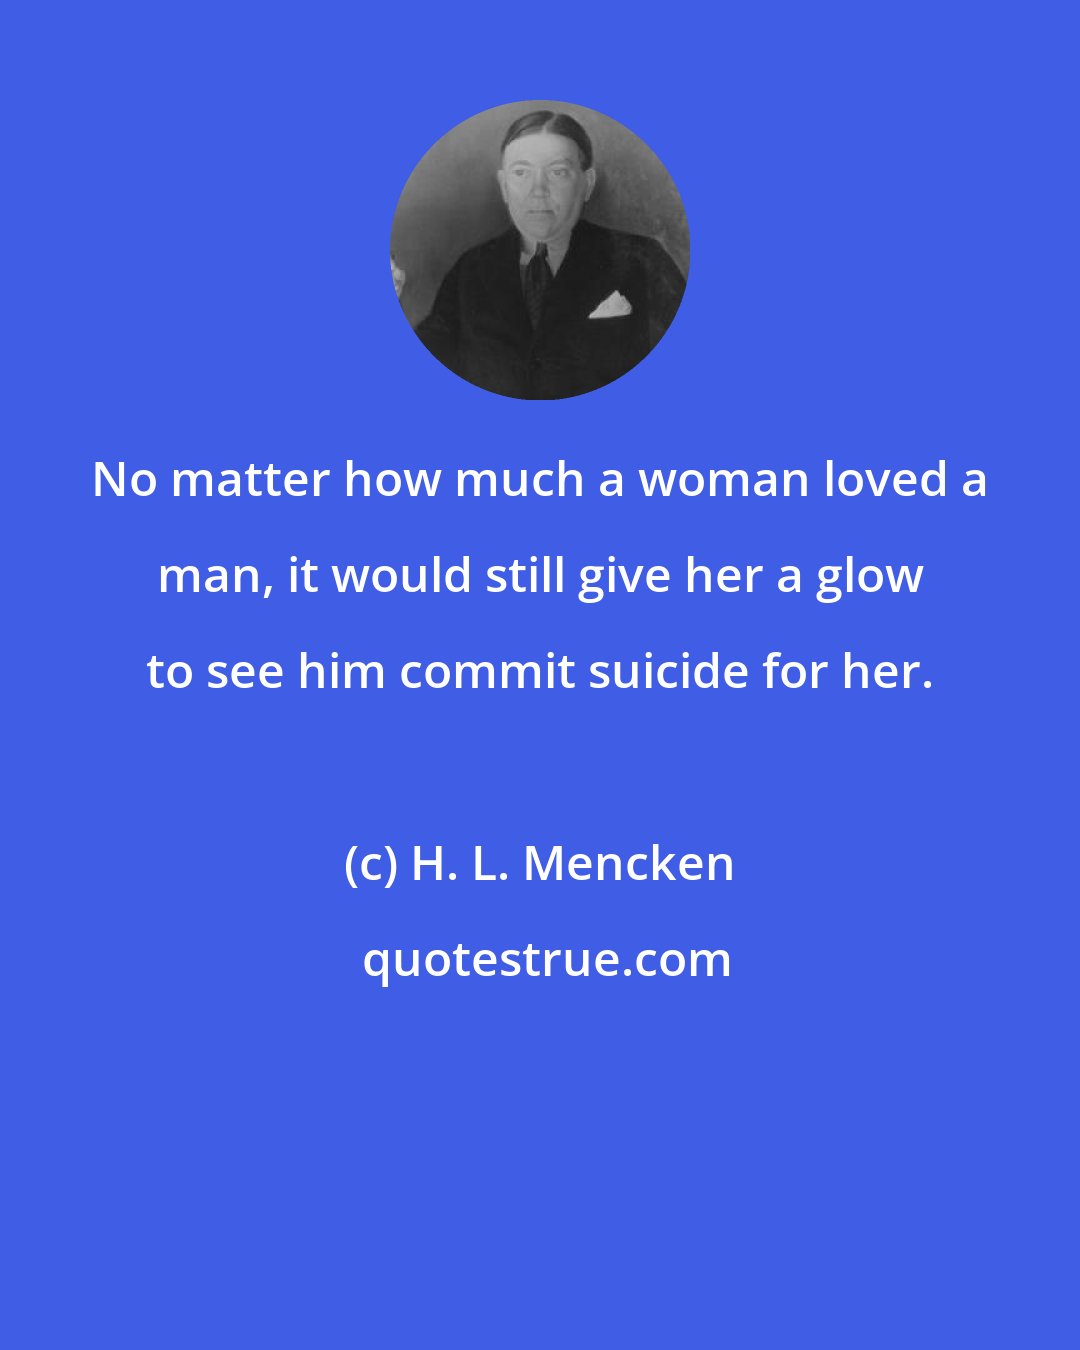 H. L. Mencken: No matter how much a woman loved a man, it would still give her a glow to see him commit suicide for her.